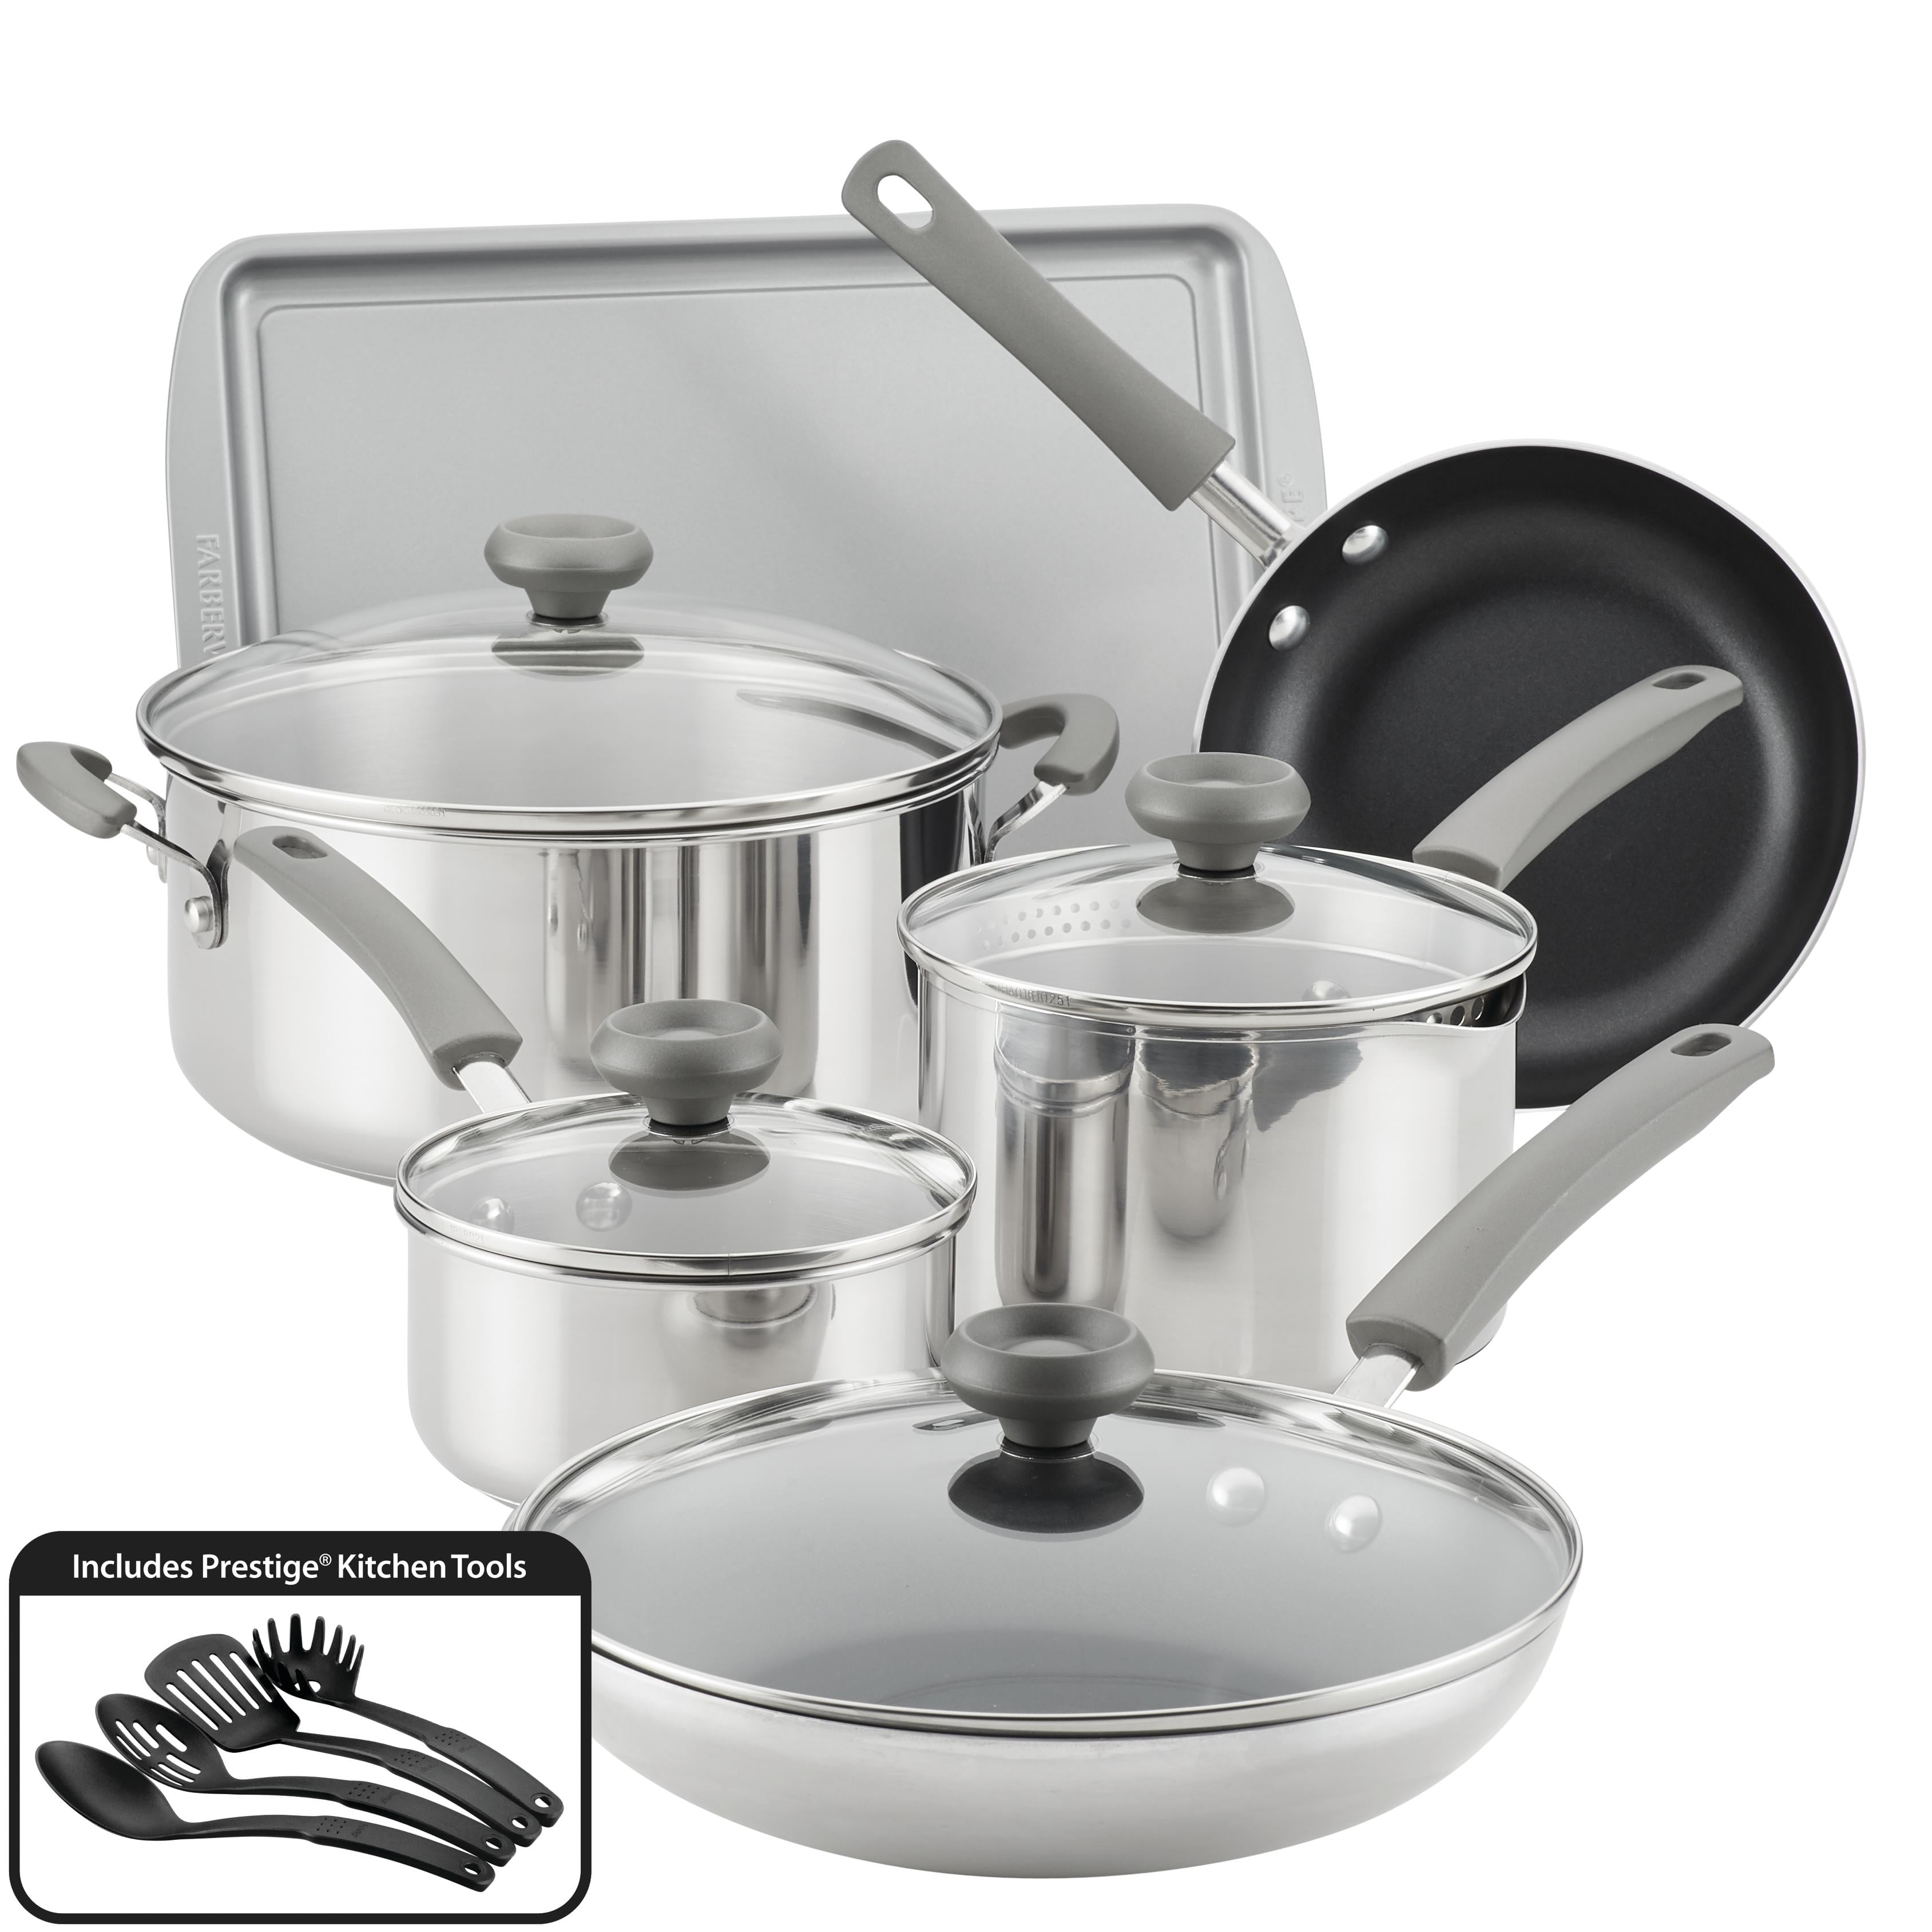 Farberware 14-Piece Complements Stainless Steel and Nonstick Pots and Farberware Stainless Steel Pots And Pans Set